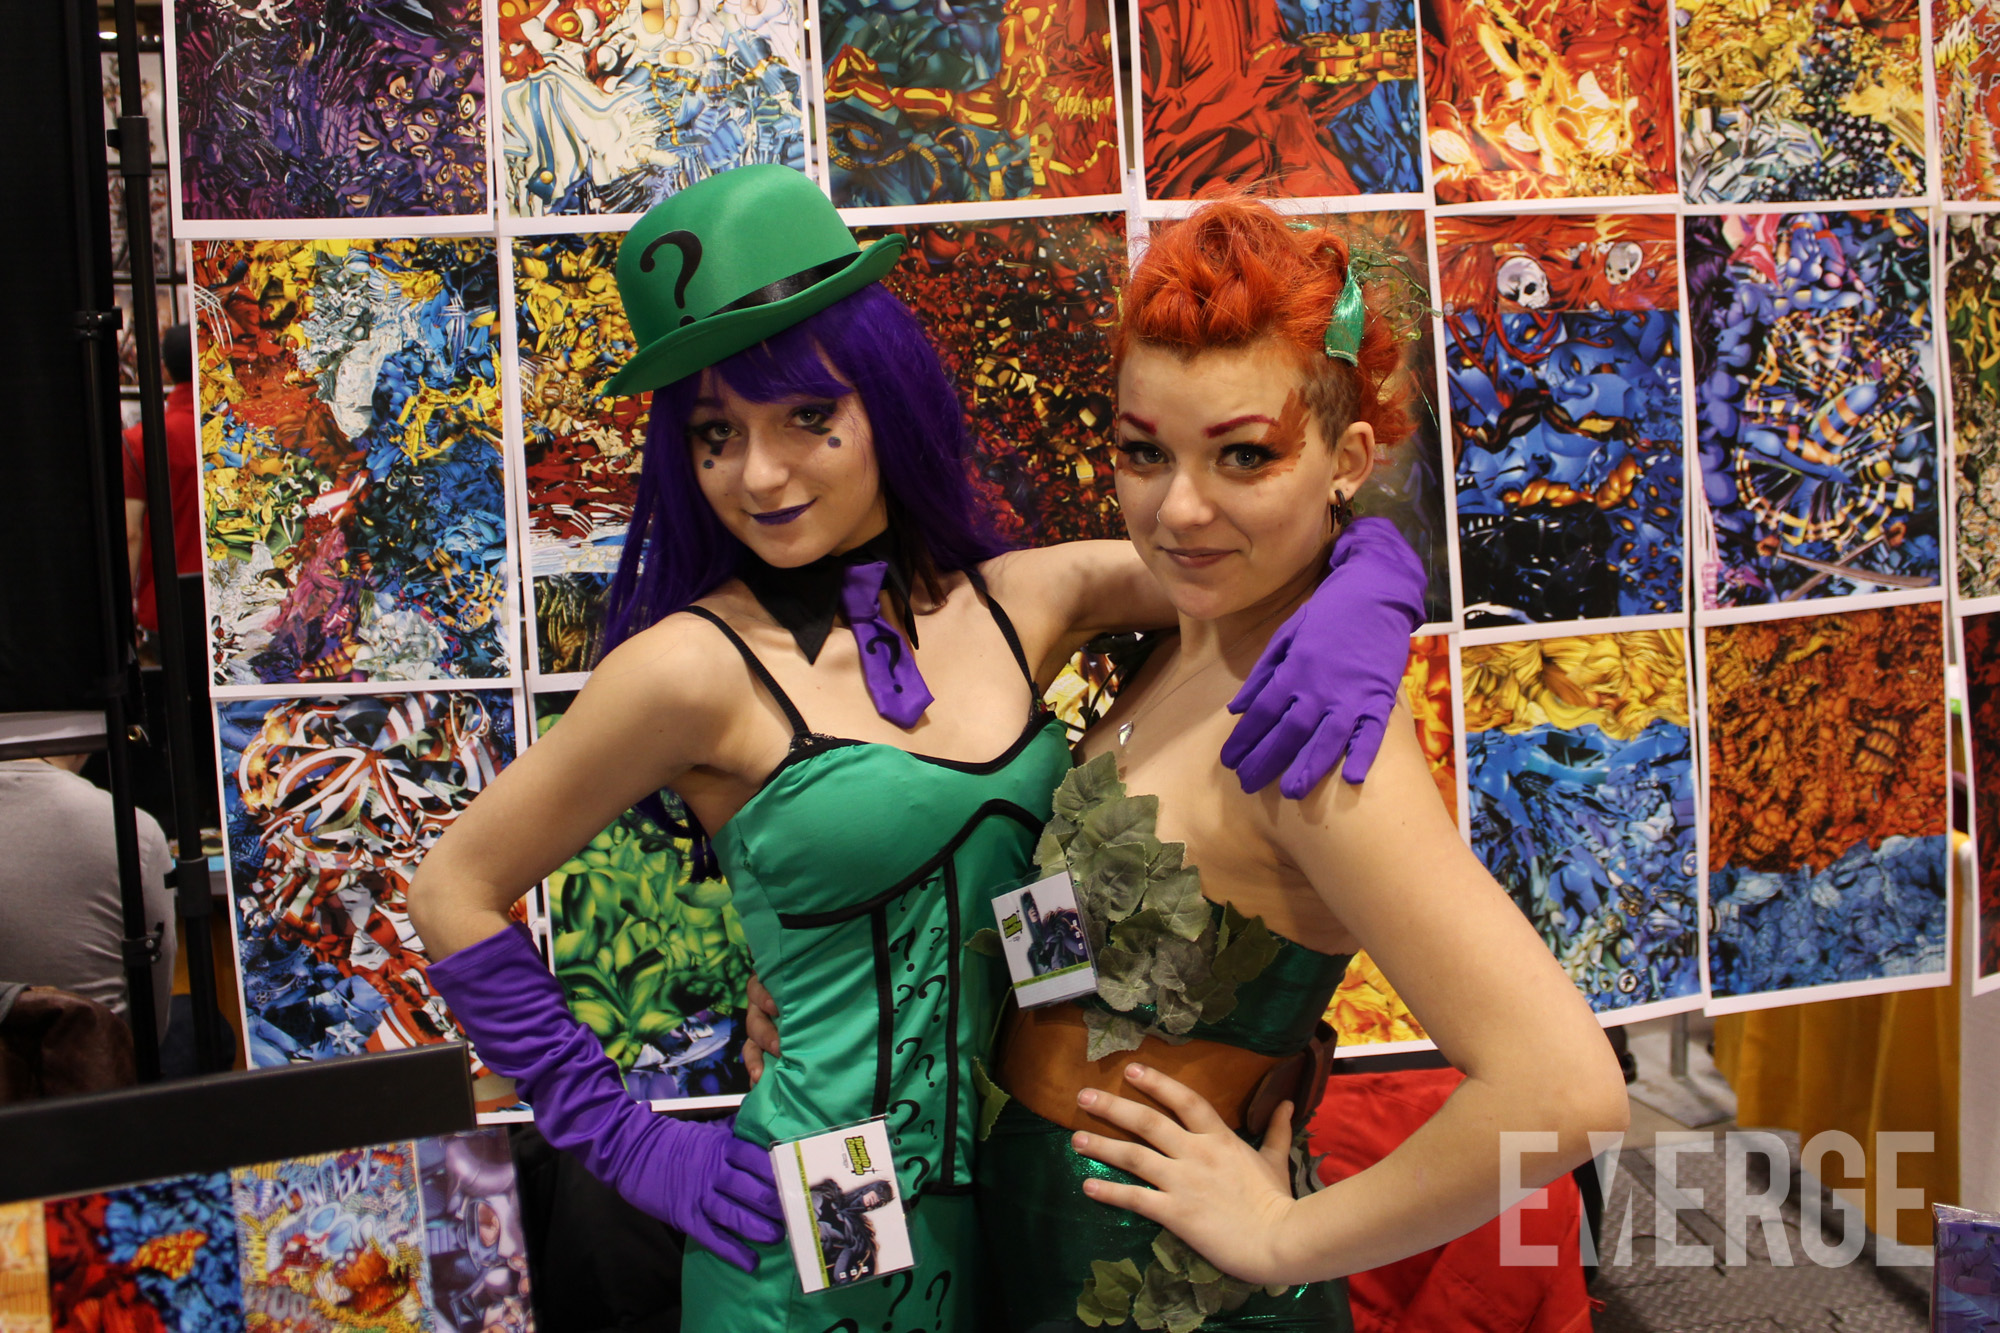 "Ridlette" and Poison Ivy posing in front of their booth